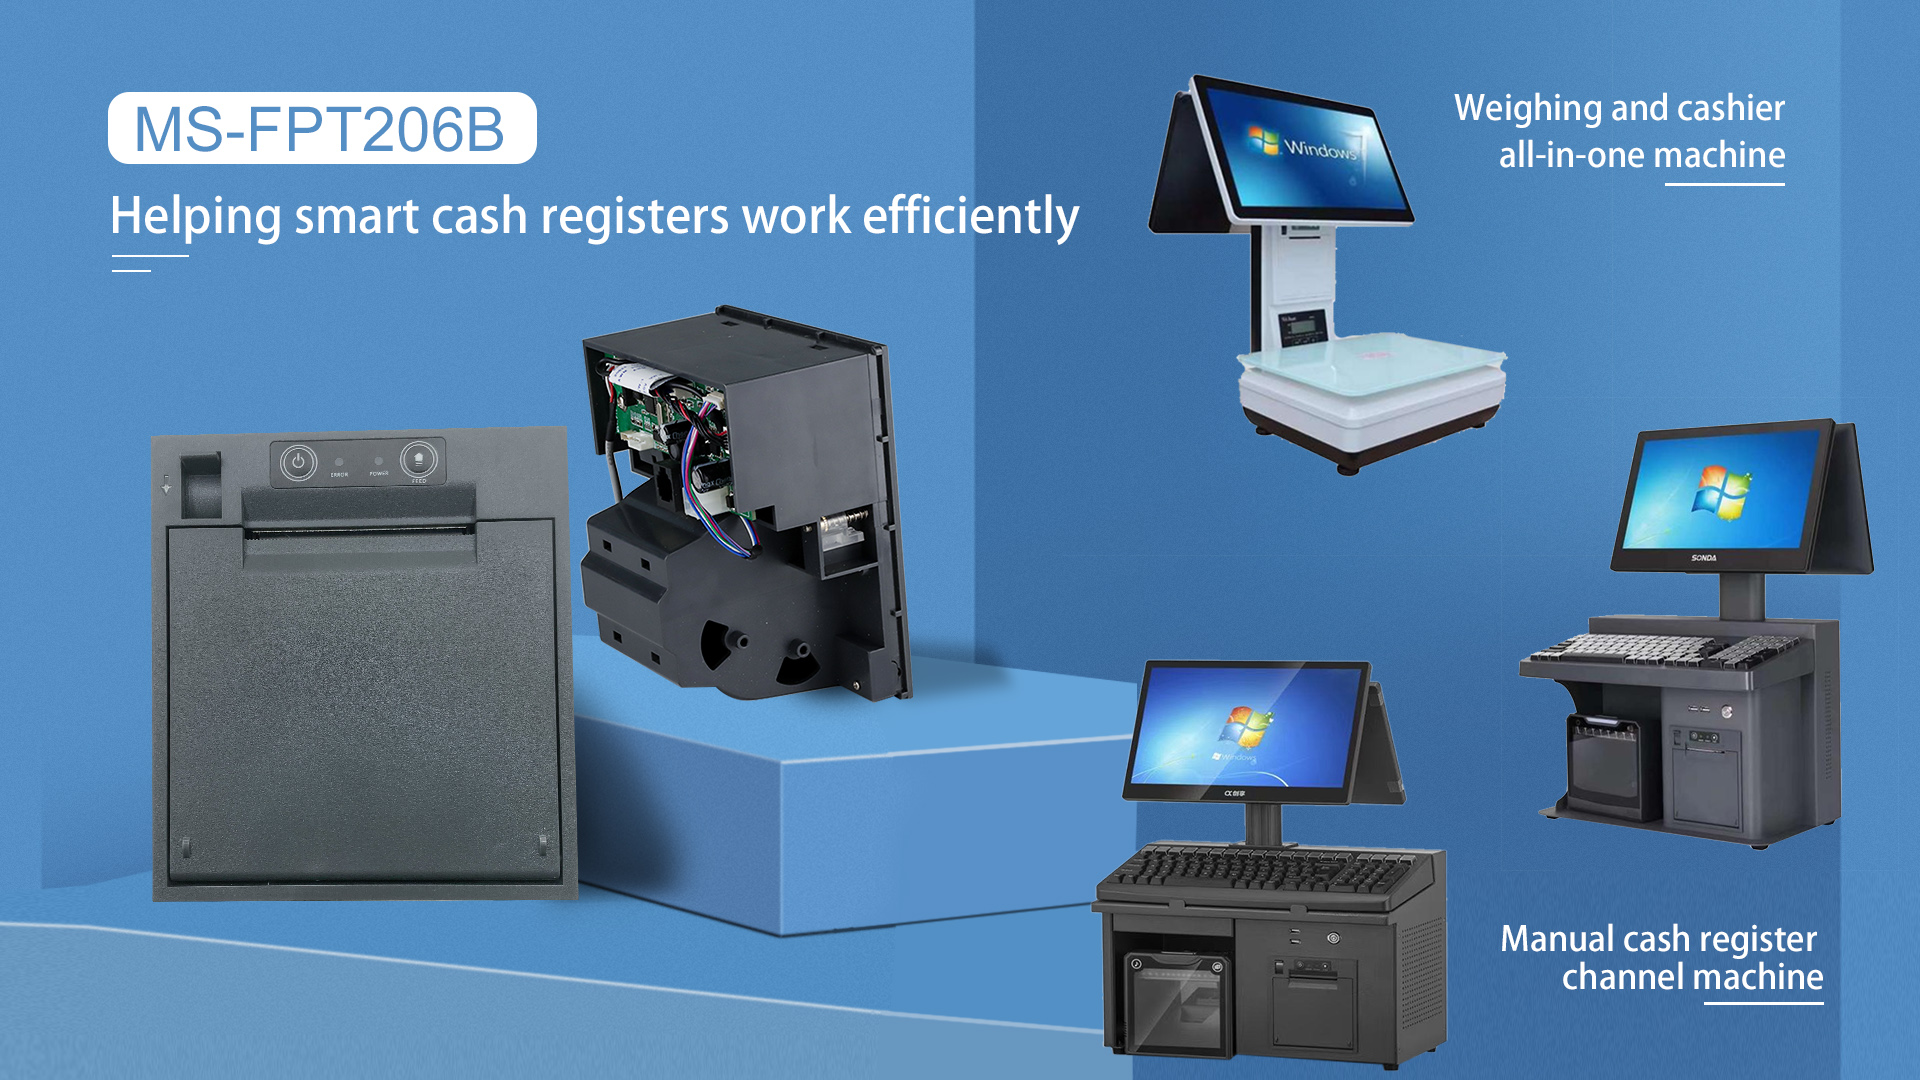 What are the advantages of the smart channel cash register all-in-one machine under the epidemic?